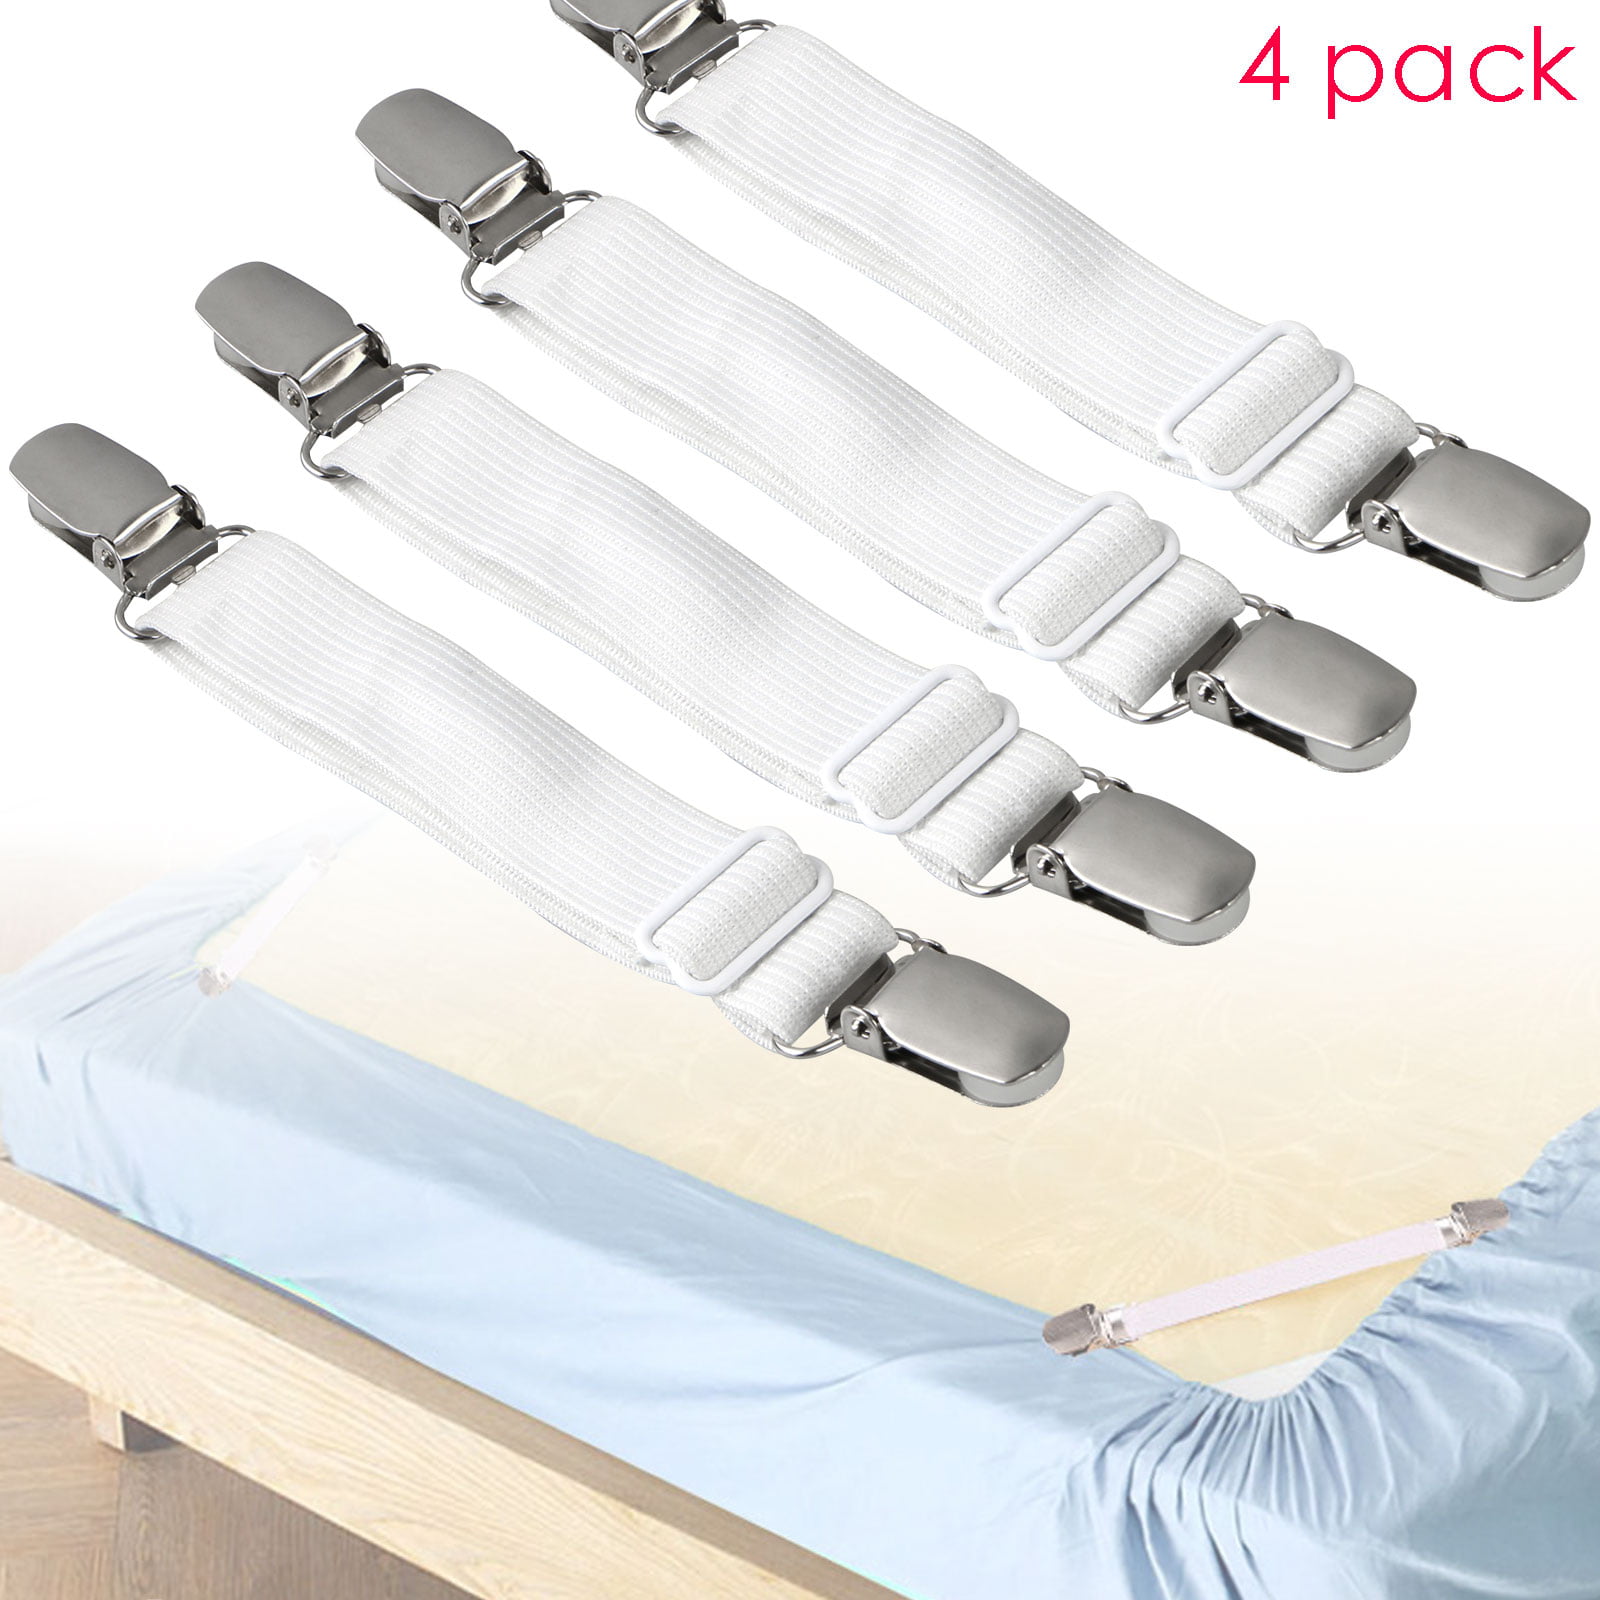 Bed Sheet Grippers Clips Set Suspender Adjustable Fasteners Holders Straps 4pc 